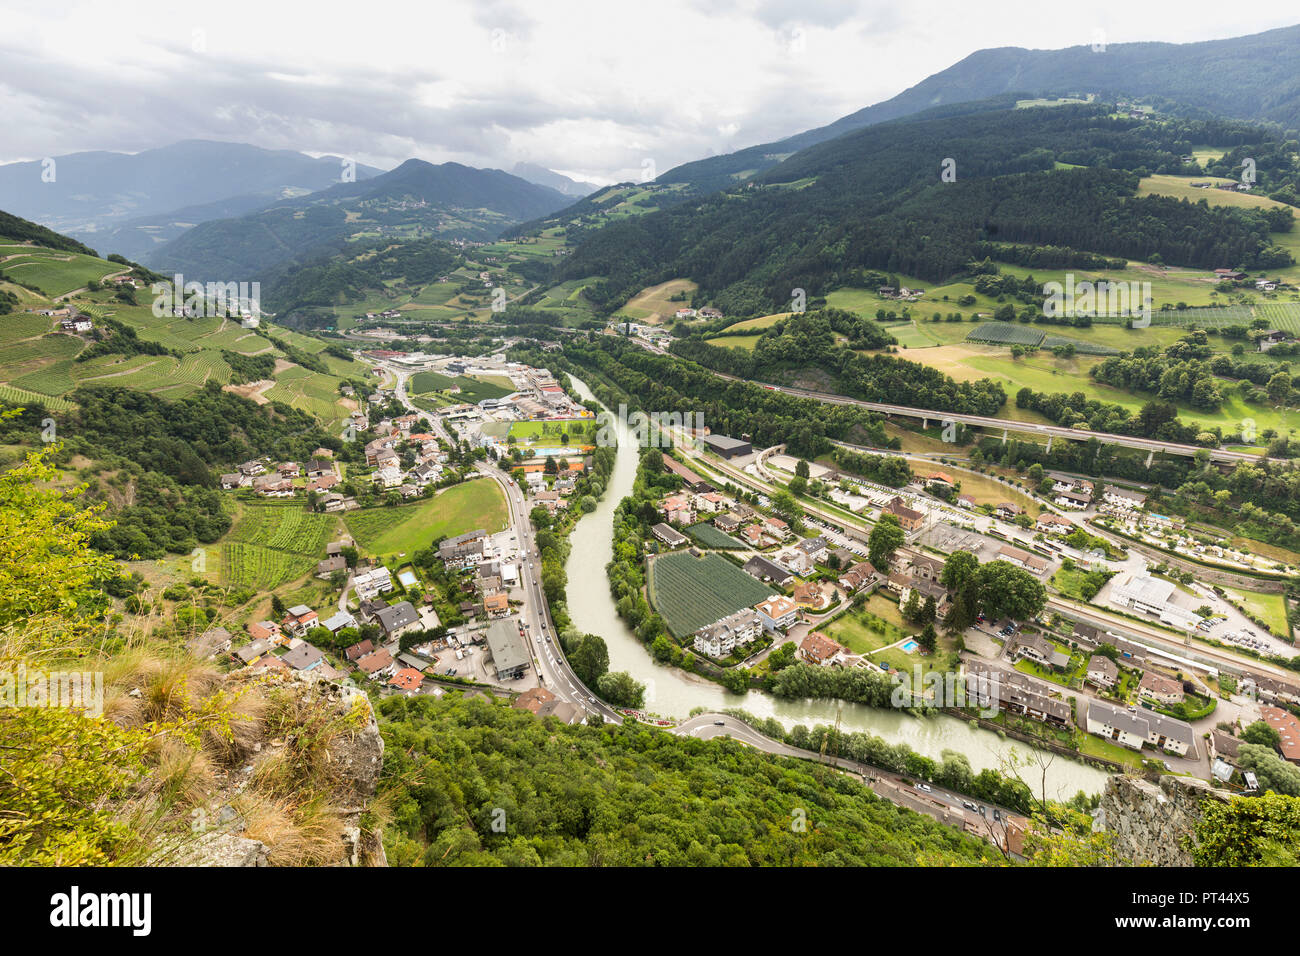 an aereal view of Klausen in Eisack Valley, Bolzano province, South Tyrol, Trentino Alto Adige, Italy Stock Photo